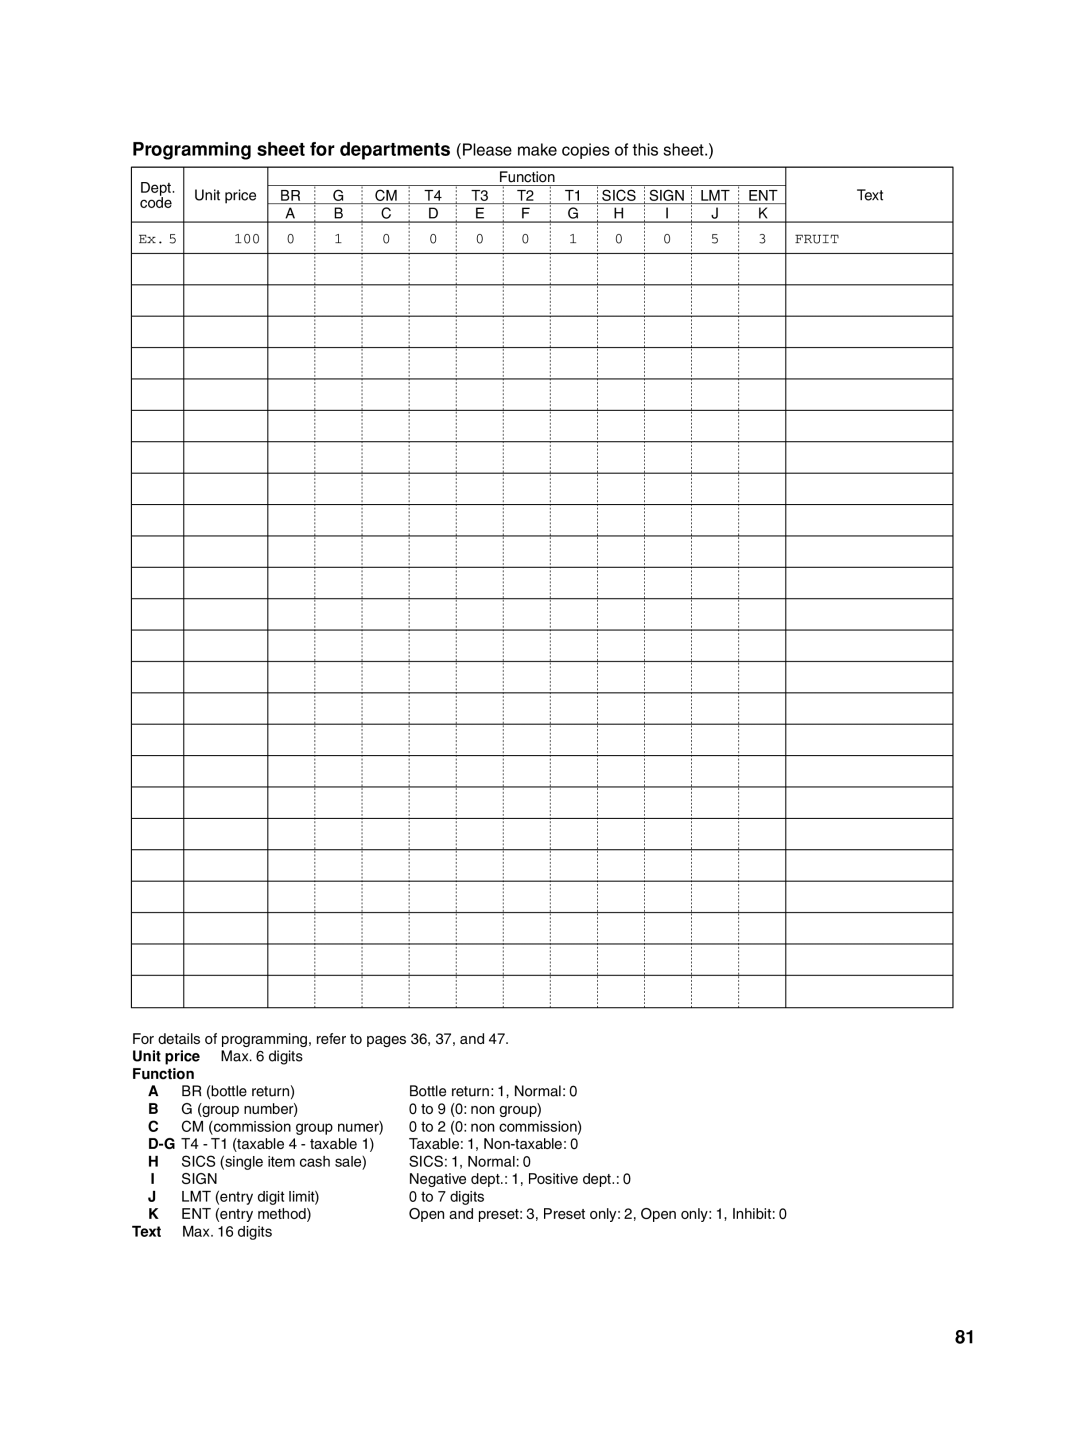 Sharp XE-A42S instruction manual Programming sheet for departments Please make copies of this sheet, Fruit, Function, Text 